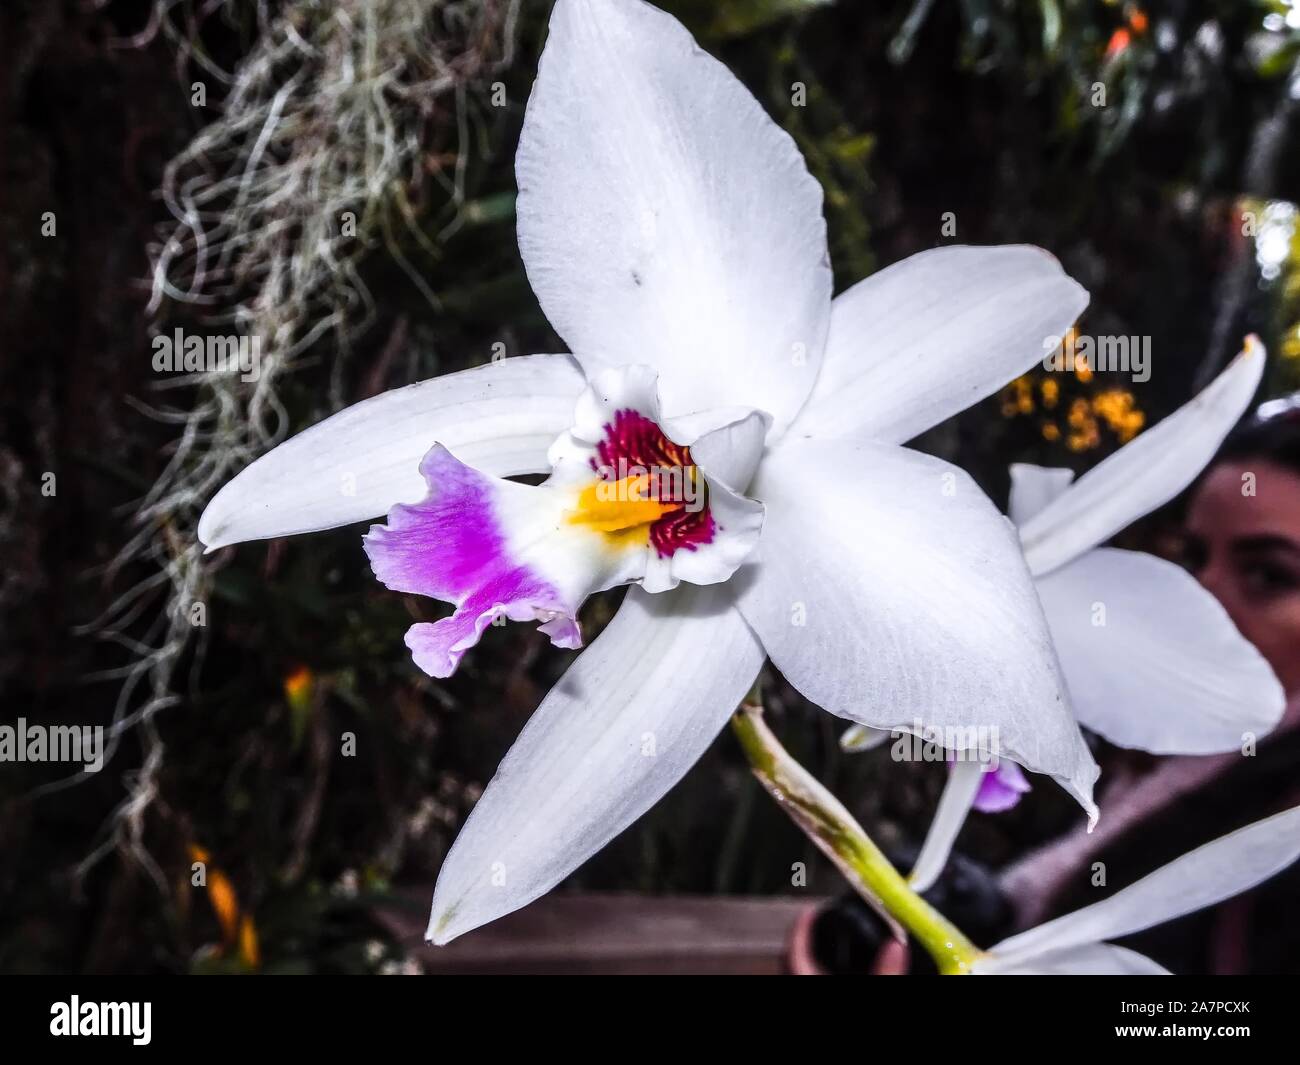 Thailand - purple and white exotic orchid Cattleya flower Stock Photo